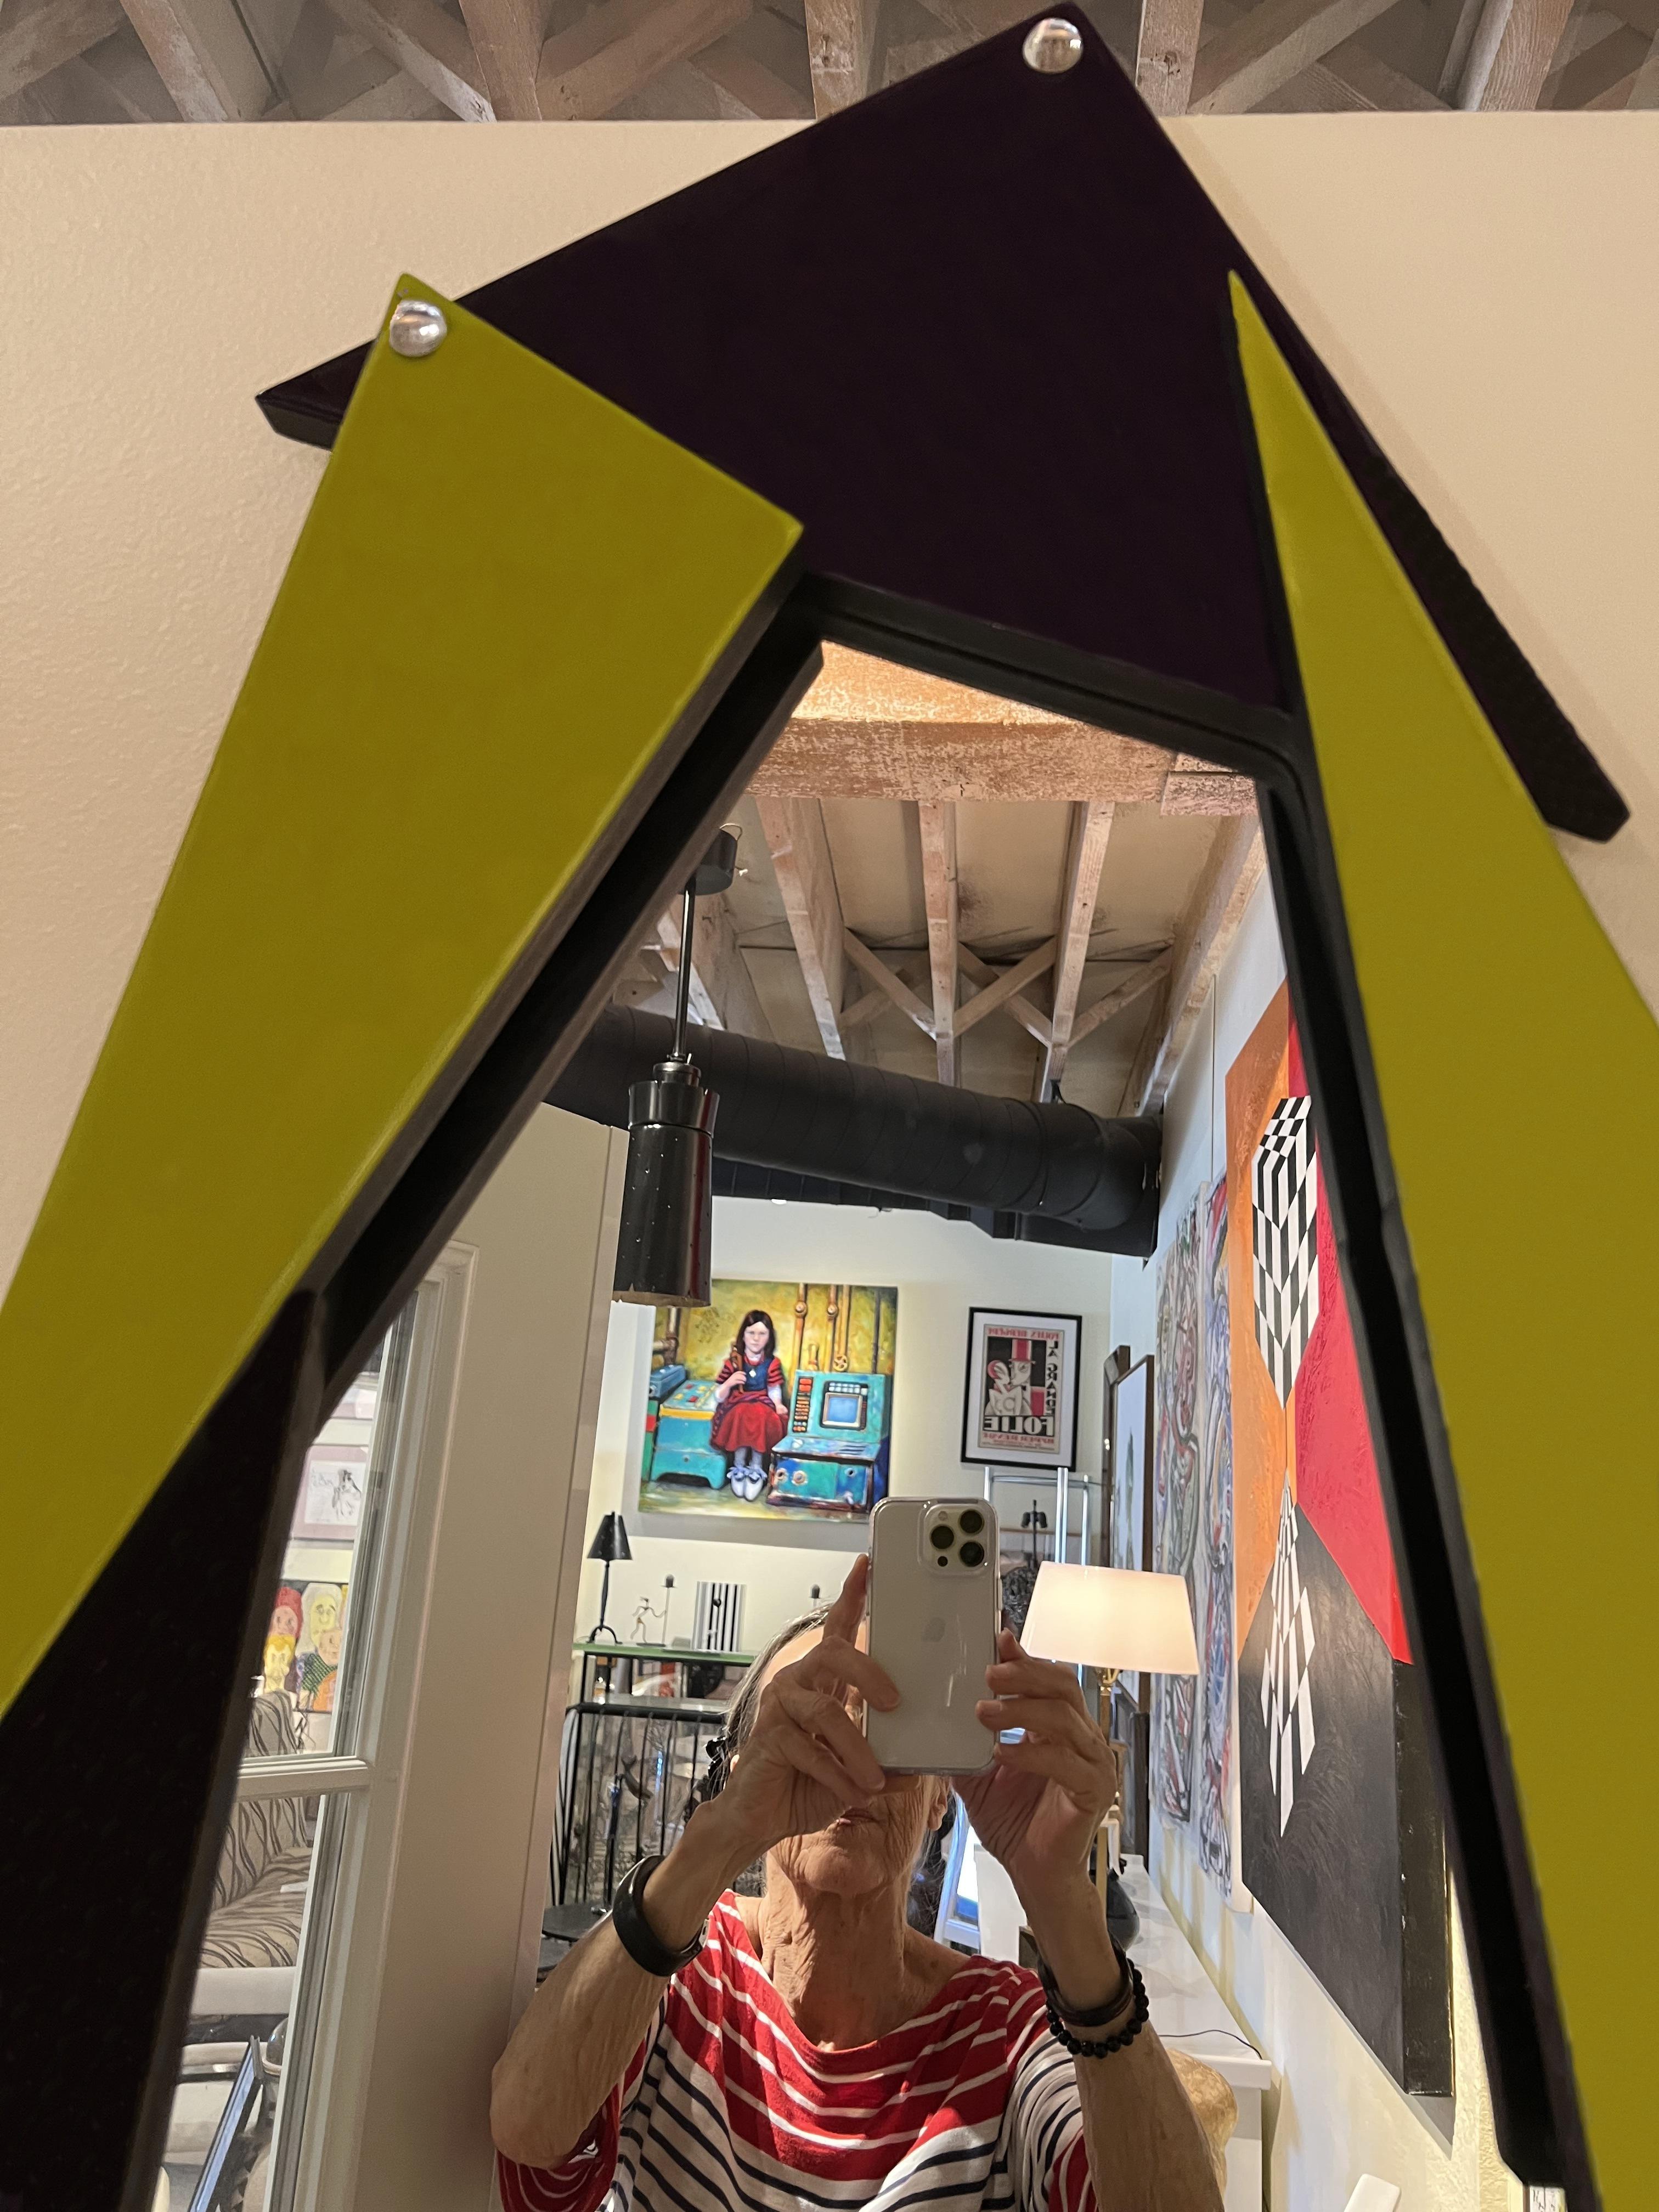 This piece features a mirror framed with dark purple and olive green glass triangles.
Memphis Design is a new style that only starts in 1980. The 80s was a period of eclectic transformation, where previous trends were rejected but borrowed from, and